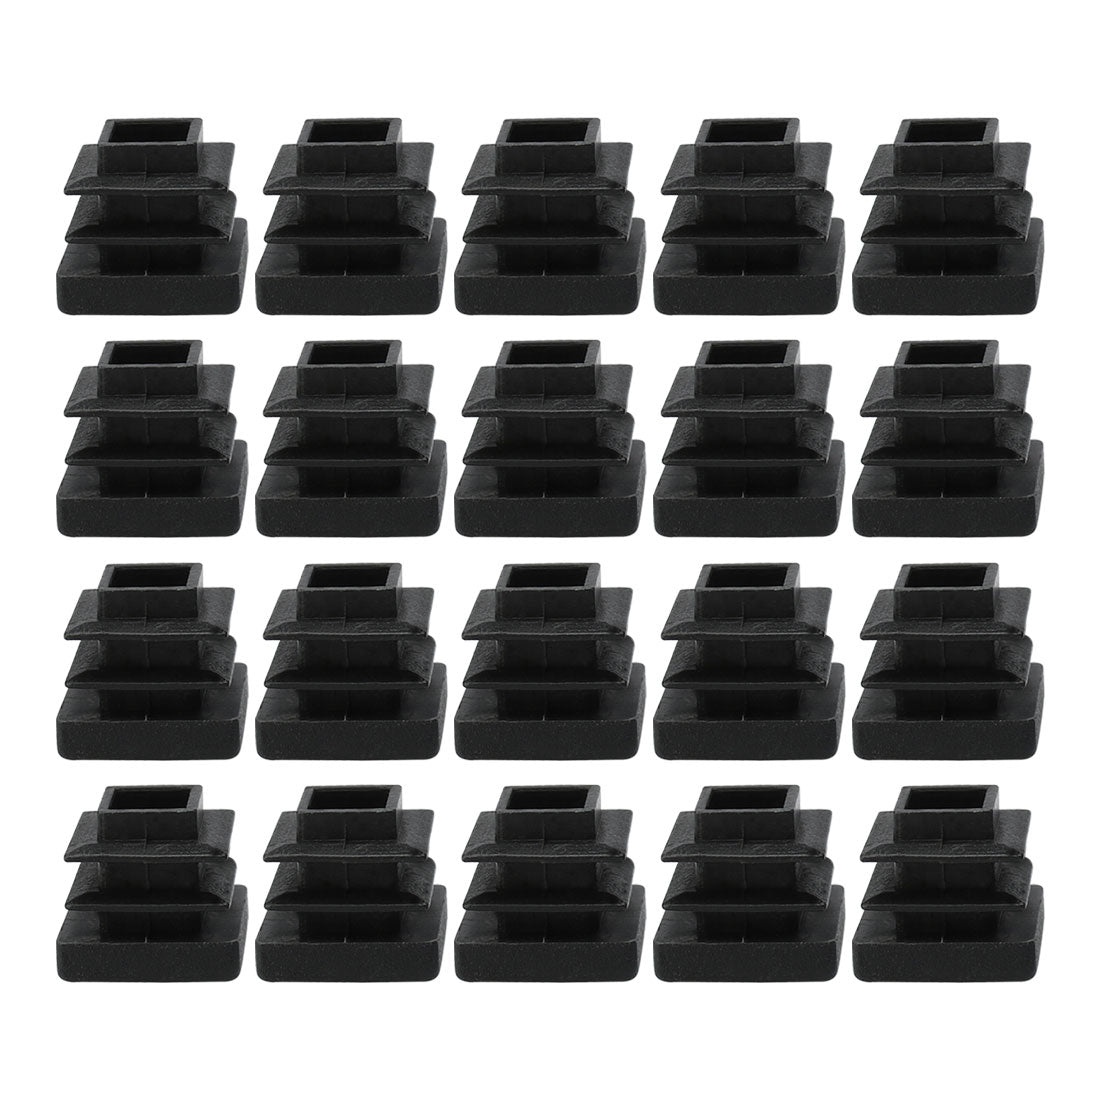 Uxcell Uxcell 20pcs 15 x 15mm Plastic Square Ribbed Tube Inserts End Covers Cap, for 0.47" to 0.55" Inner Size, Furniture Chair Table Feet Floor Protector